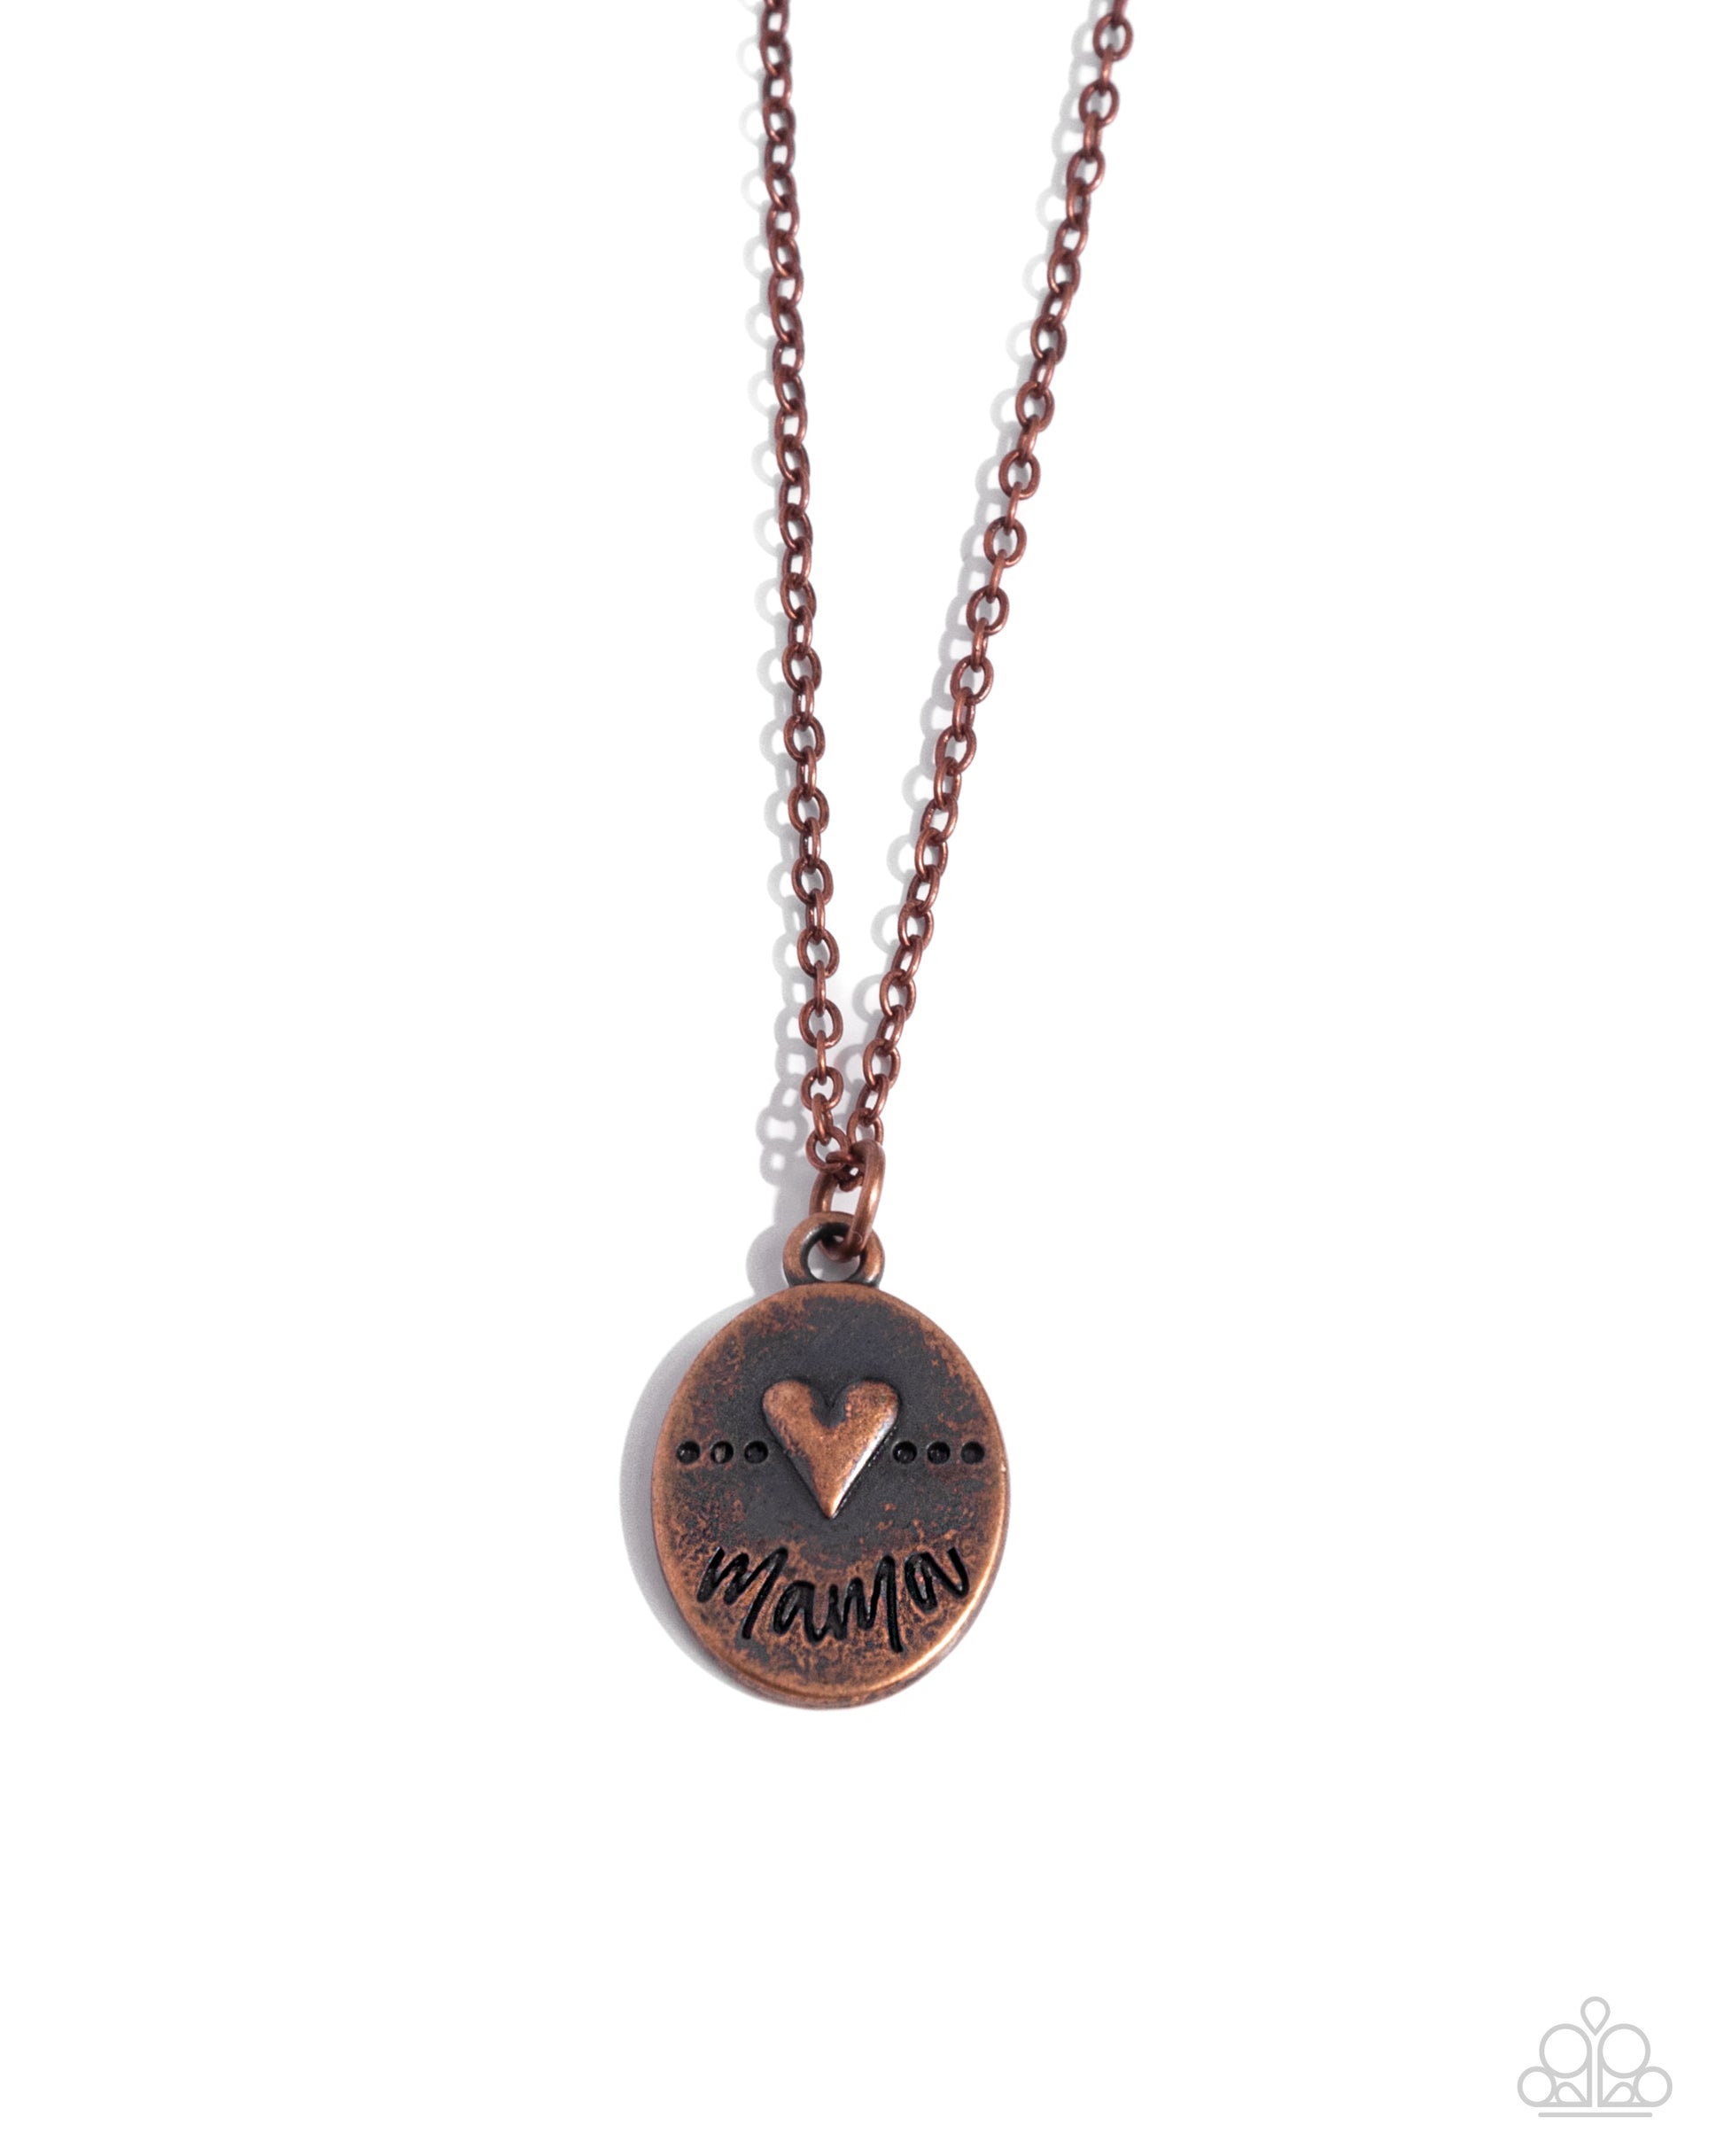 They Call Me Mama - copper - Paparazzi necklace